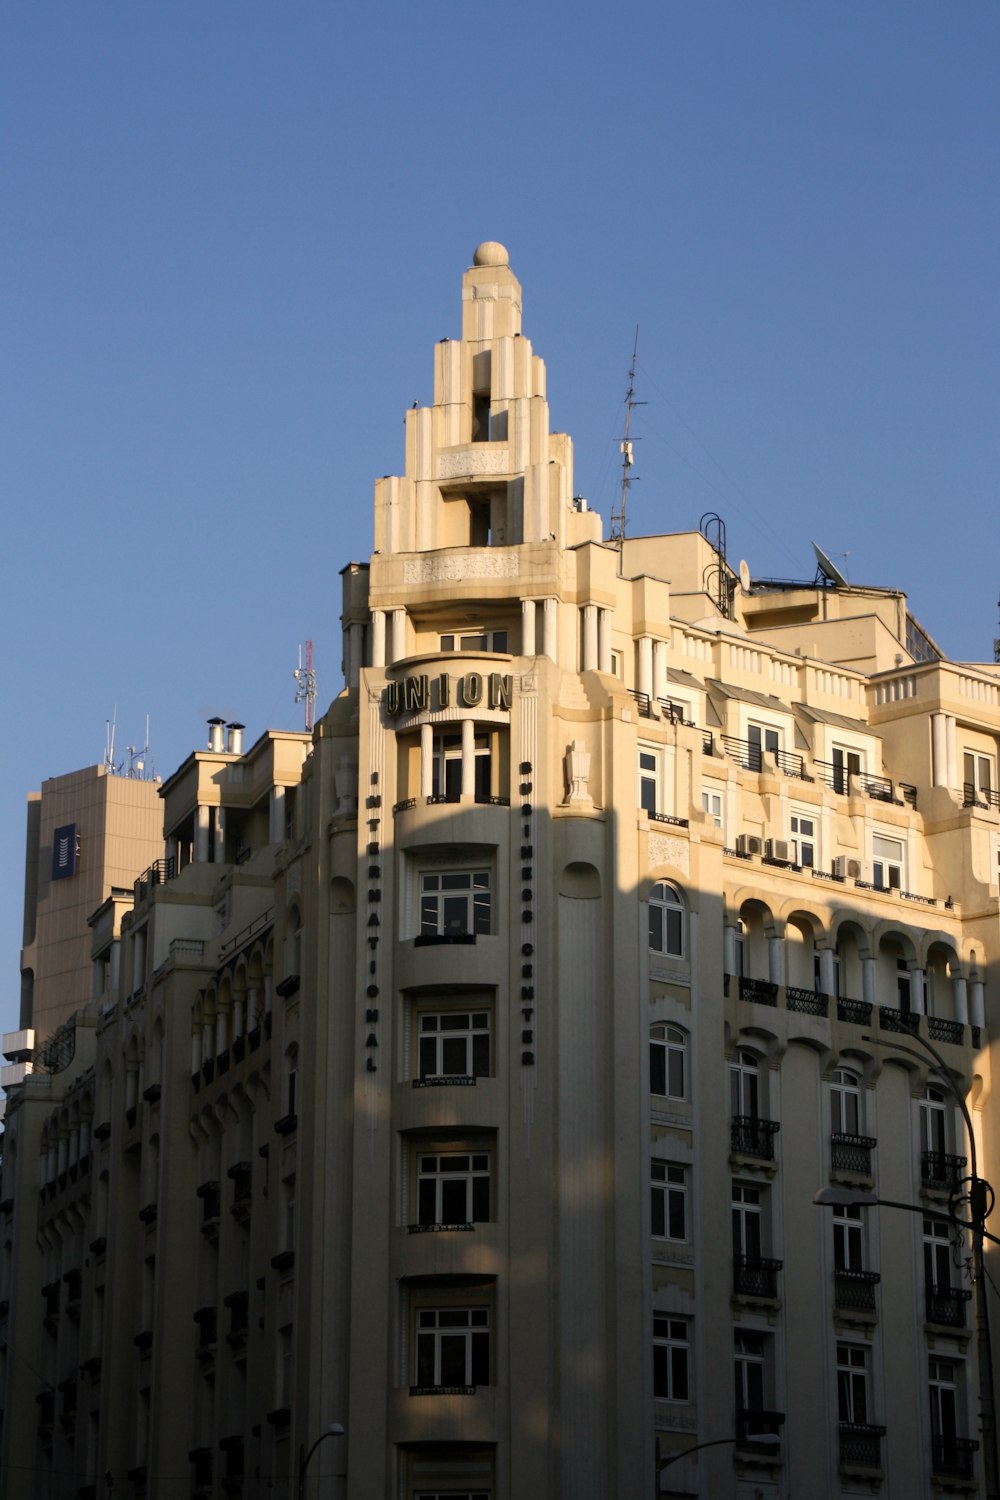 a tall building with many windows and balconies